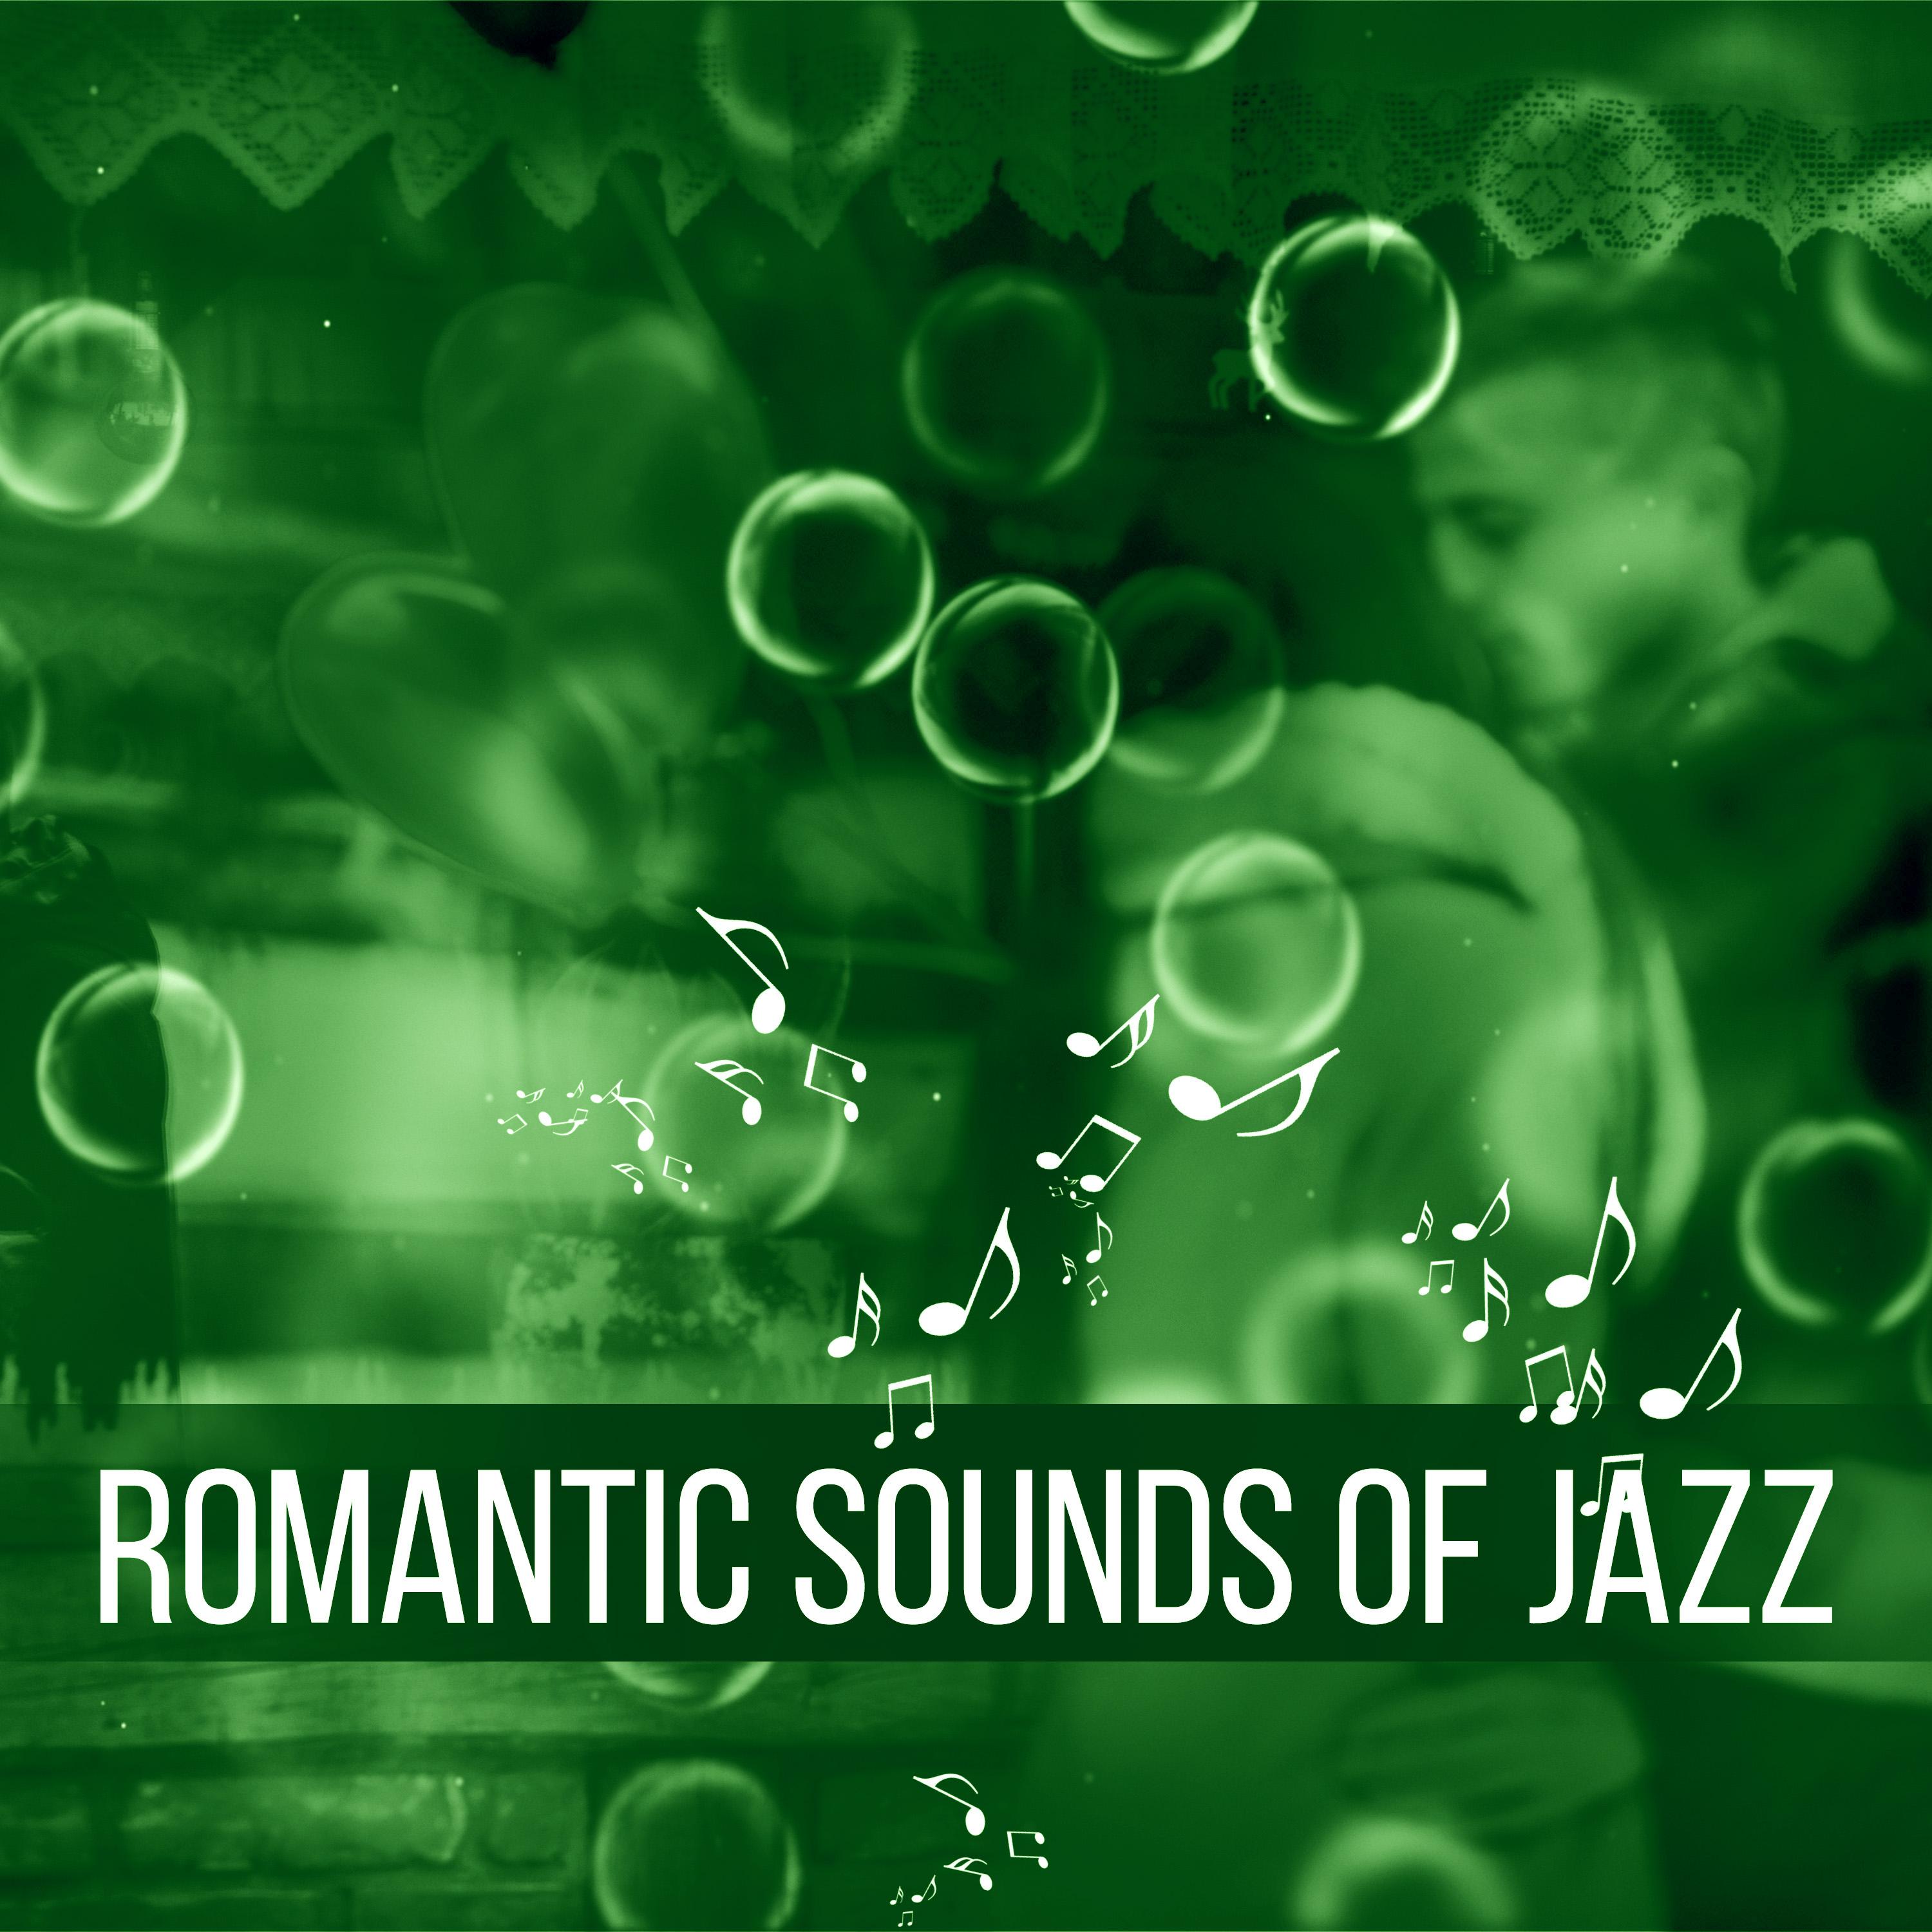 Romantic Sounds of Jazz – Instrumental Piano for Relaxation, Music for Lovers, Dinner by Candlelight, Romantic Evening, Romantic Jazz